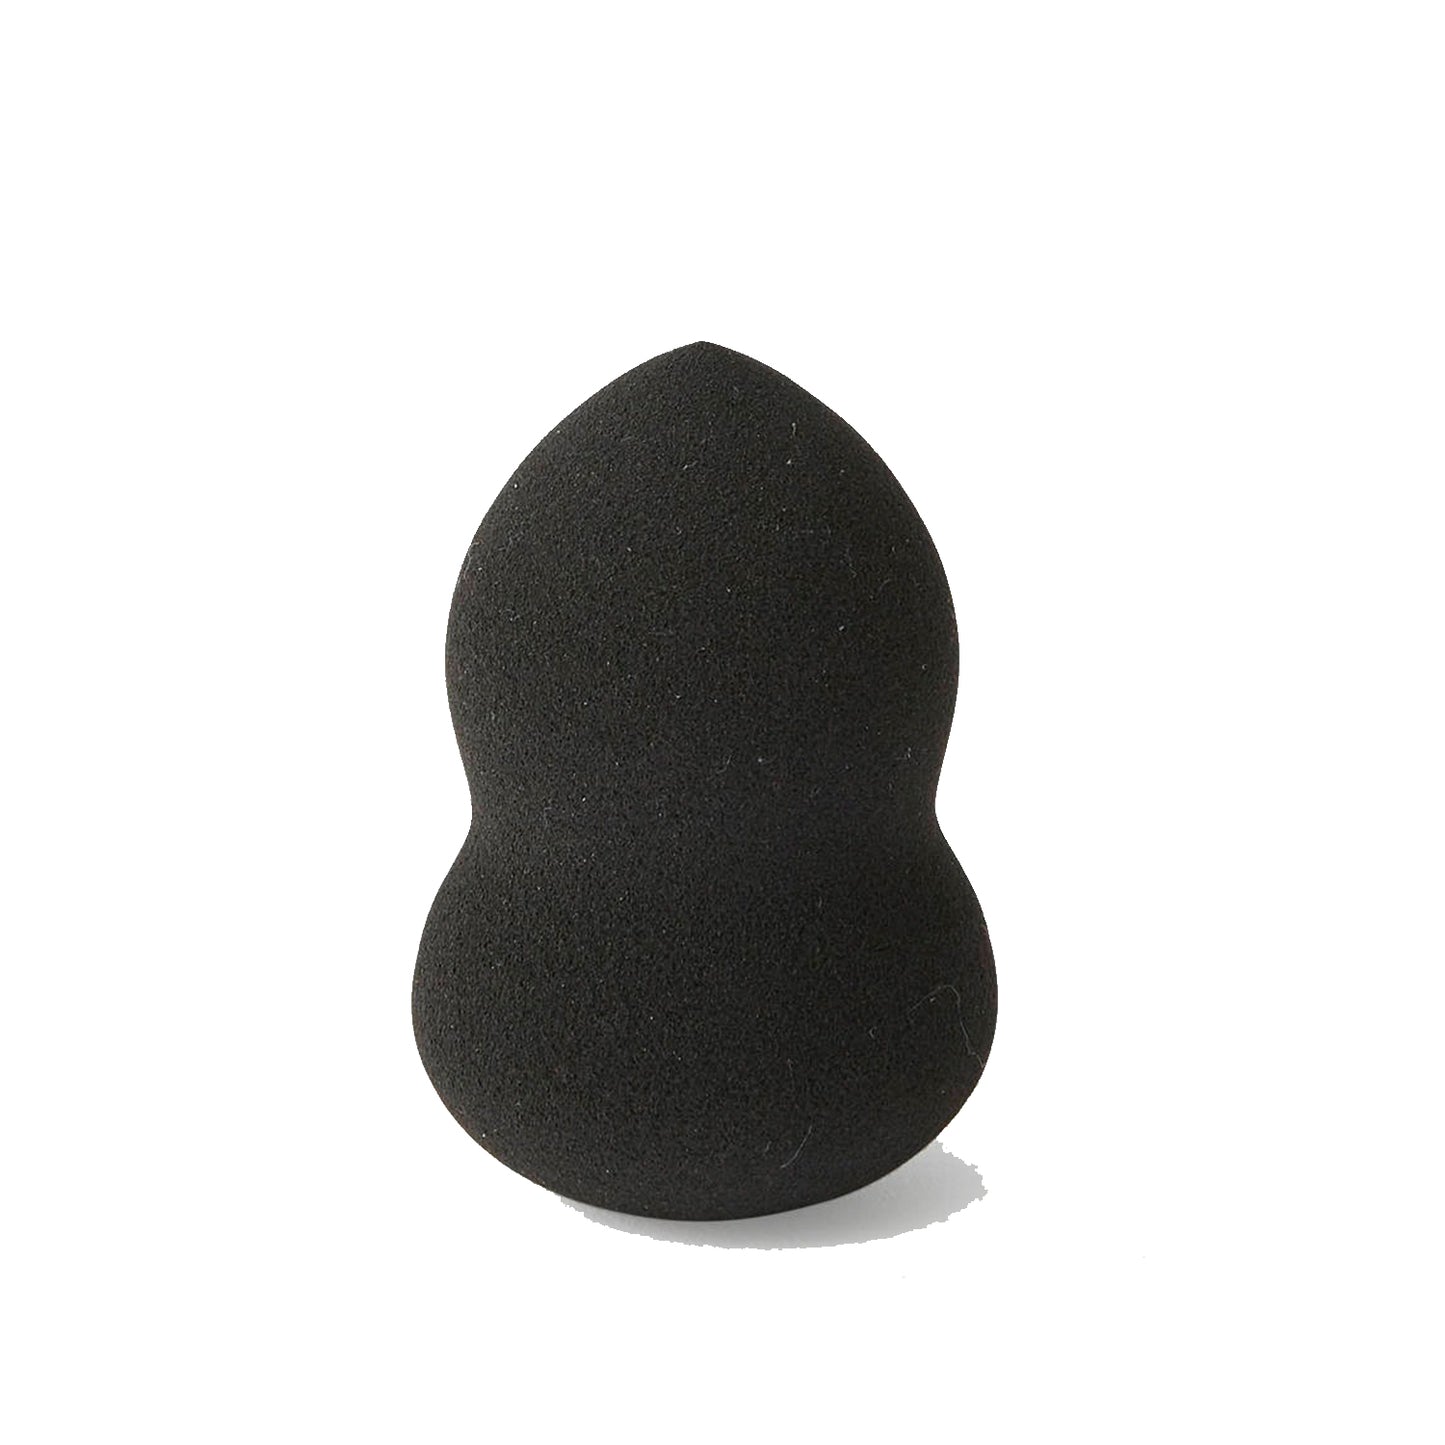 Bh Studio Pro Perfecting Sponge available at heygirl.pk for delivery in Pakistan